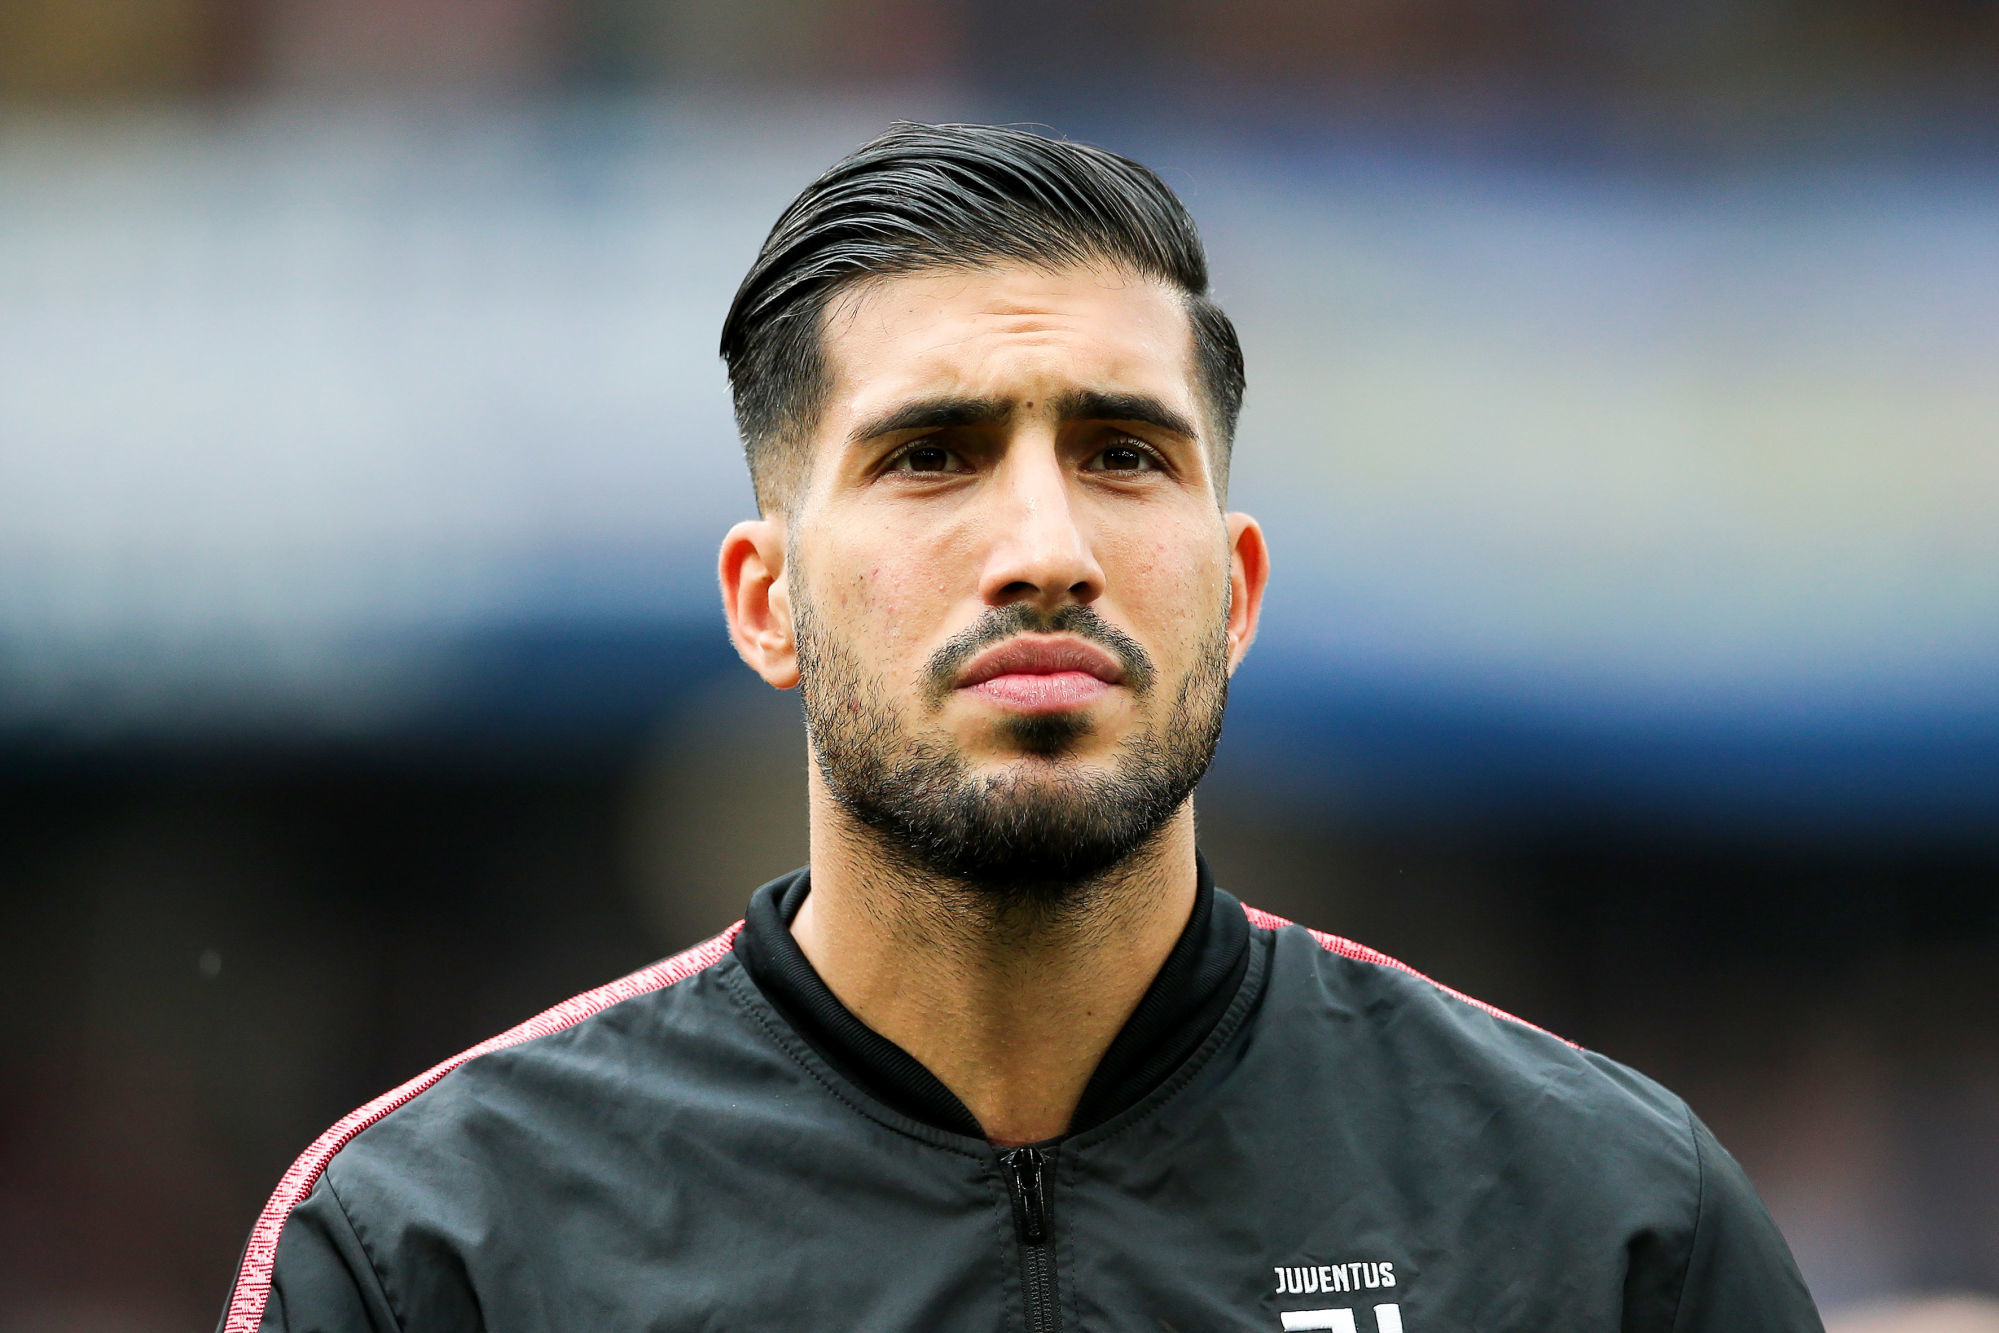 Emre Can of Juventus during the Serie A match at Luigi Ferraris, Genoa. Picture date: 26th May 2019. Photo : Spi / Icon Sport